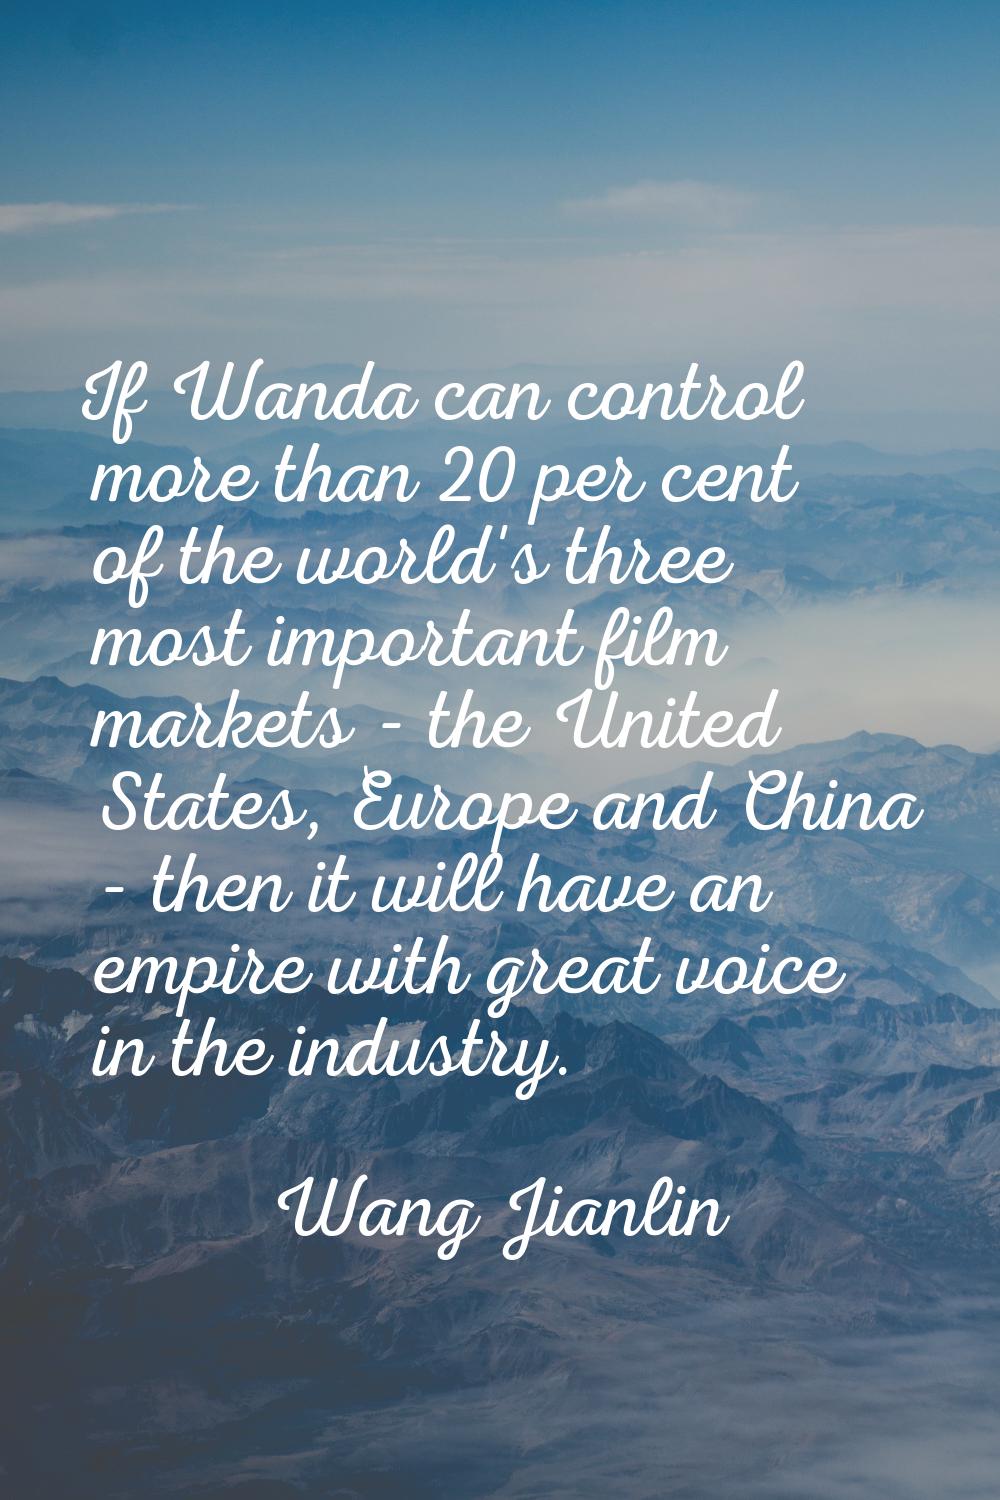 If Wanda can control more than 20 per cent of the world's three most important film markets - the U